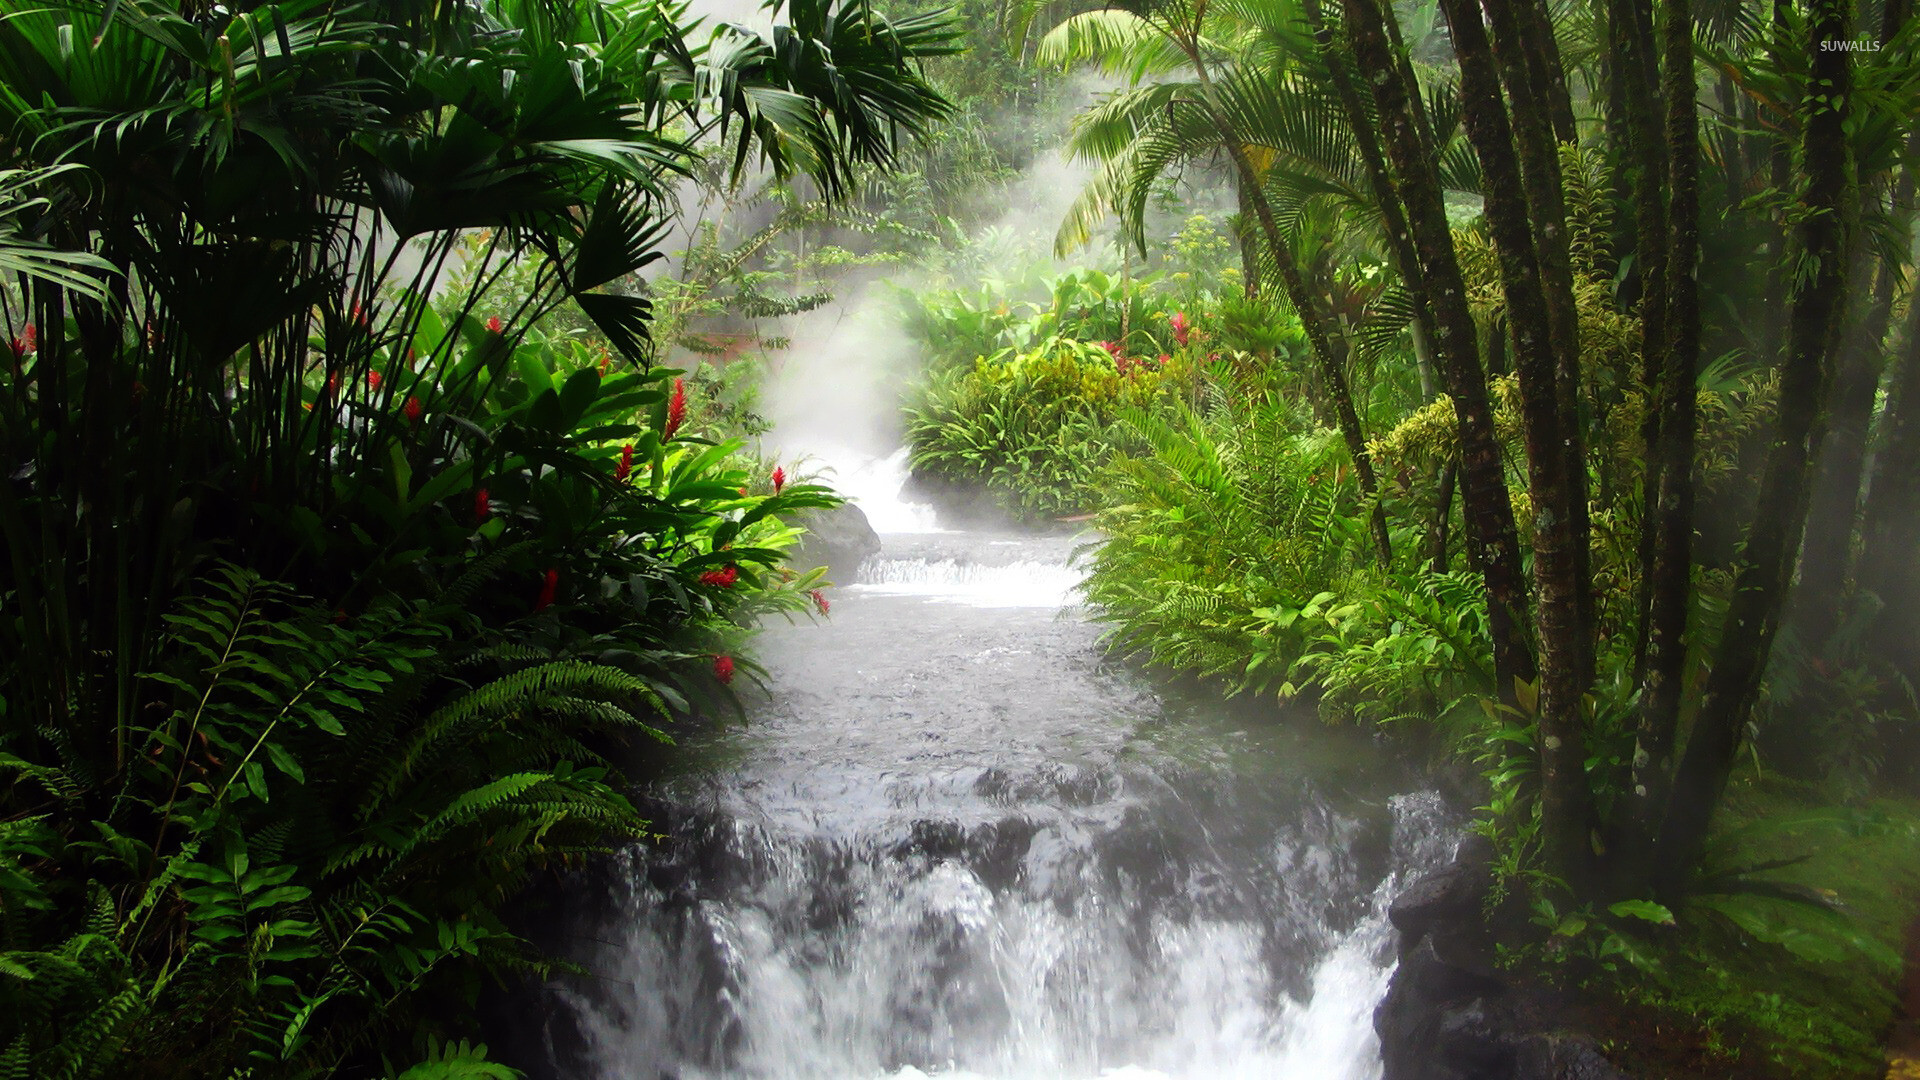 Jungle: Waterfall, Nature, Tropical forest, Uncultivated region. 1920x1080 Full HD Wallpaper.